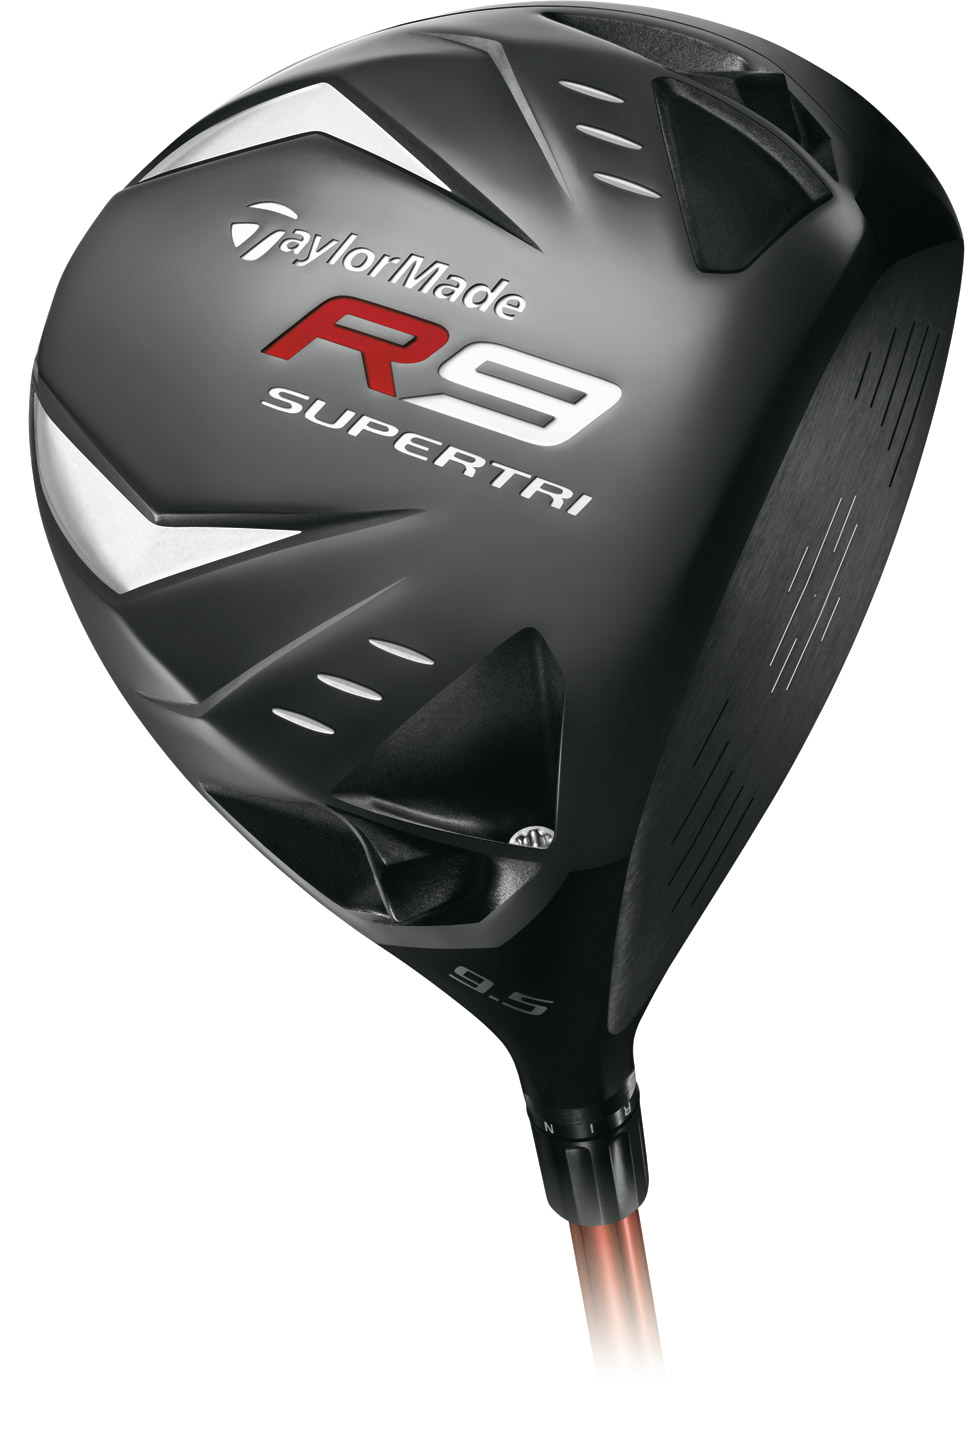 TaylorMade R9 SuperTri